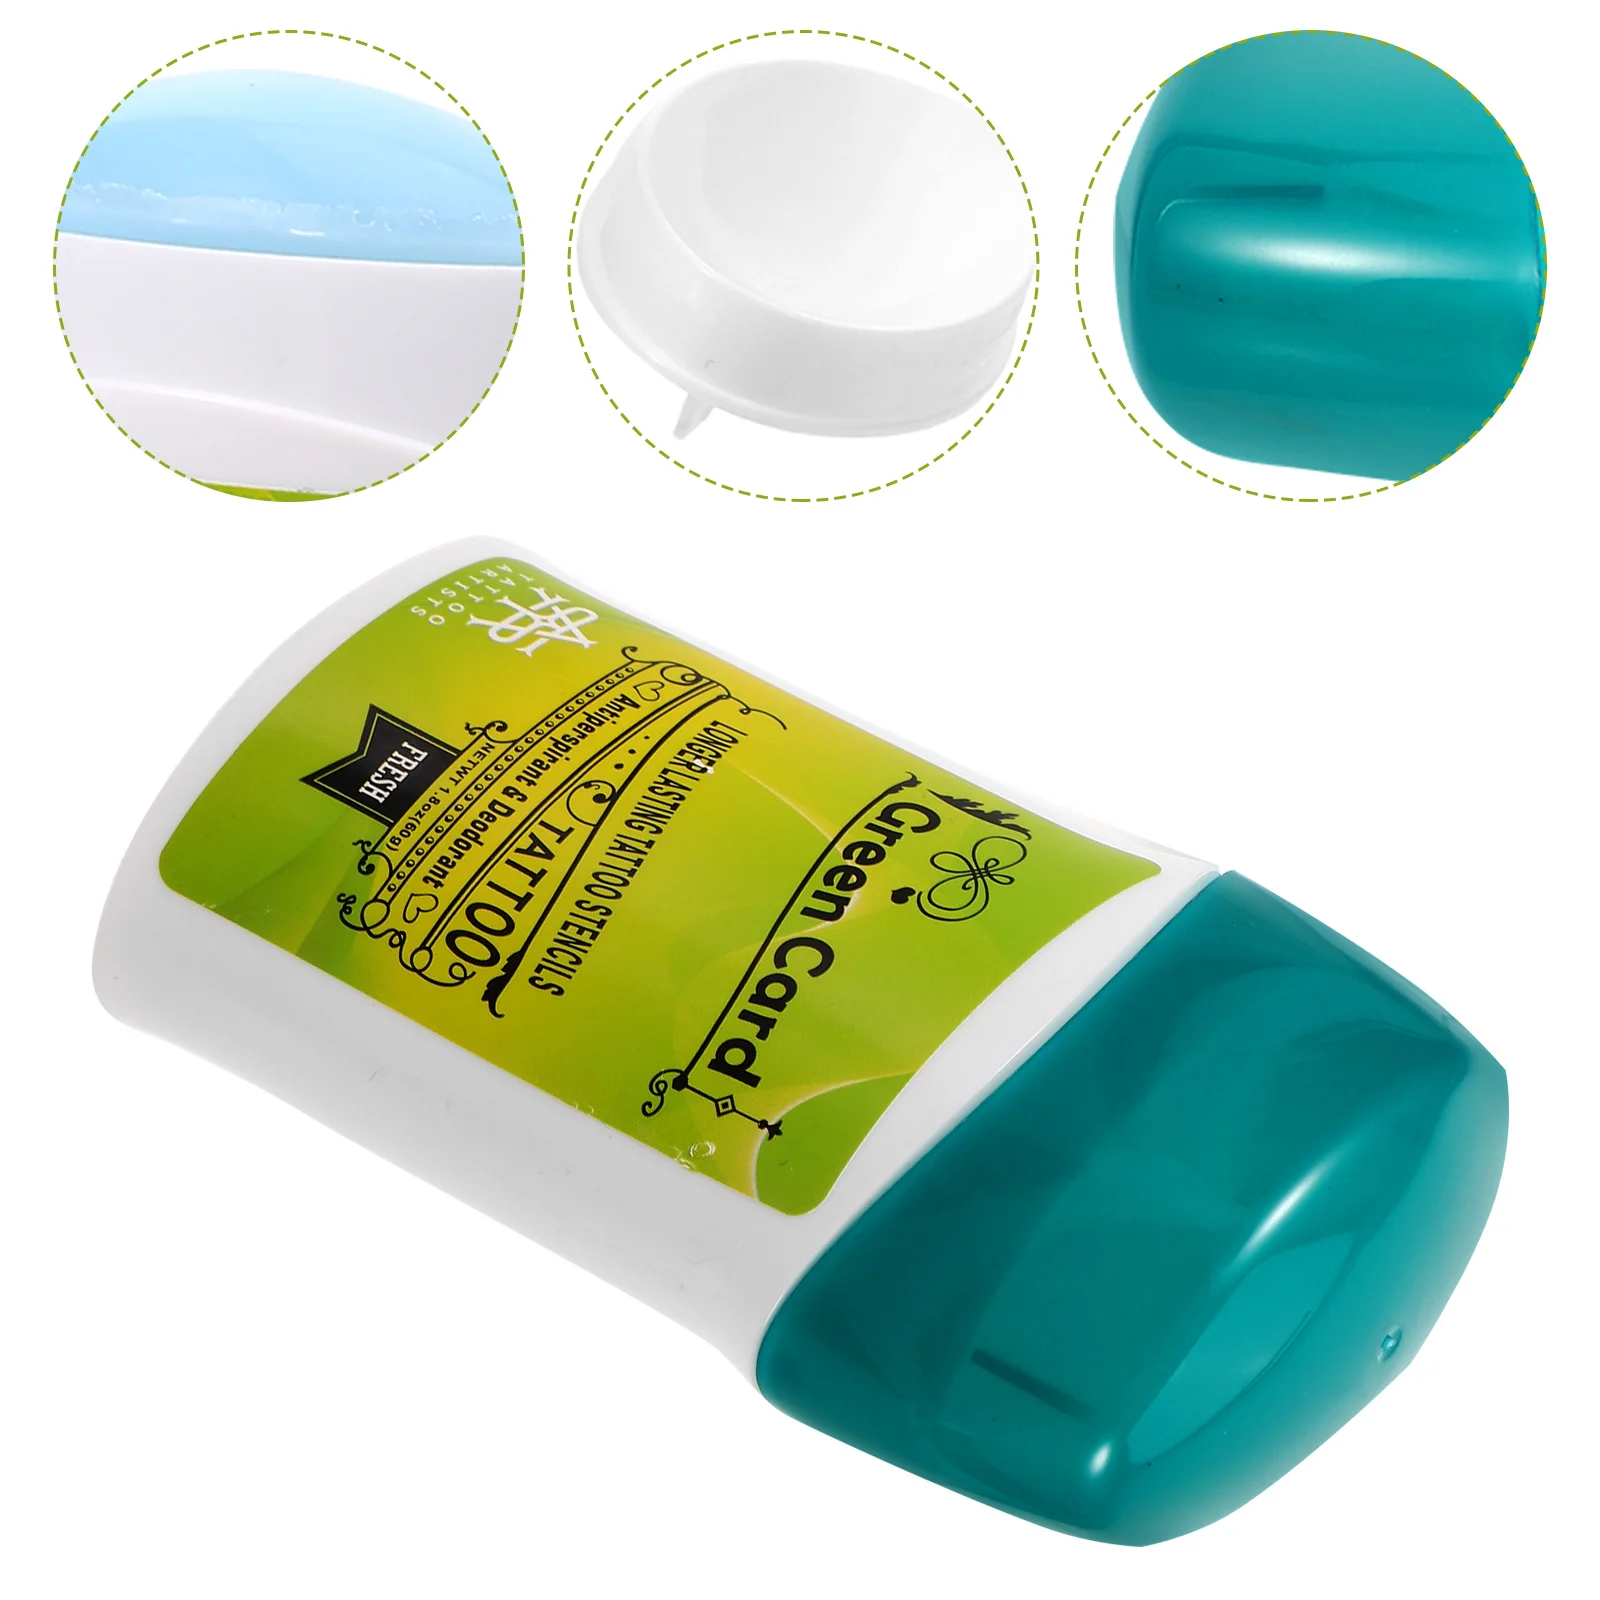 

Tattoo Transfer Soap Tattooing Supplies Paper Stencil Gel Temporary Paste Accessories Skin Solution Cream